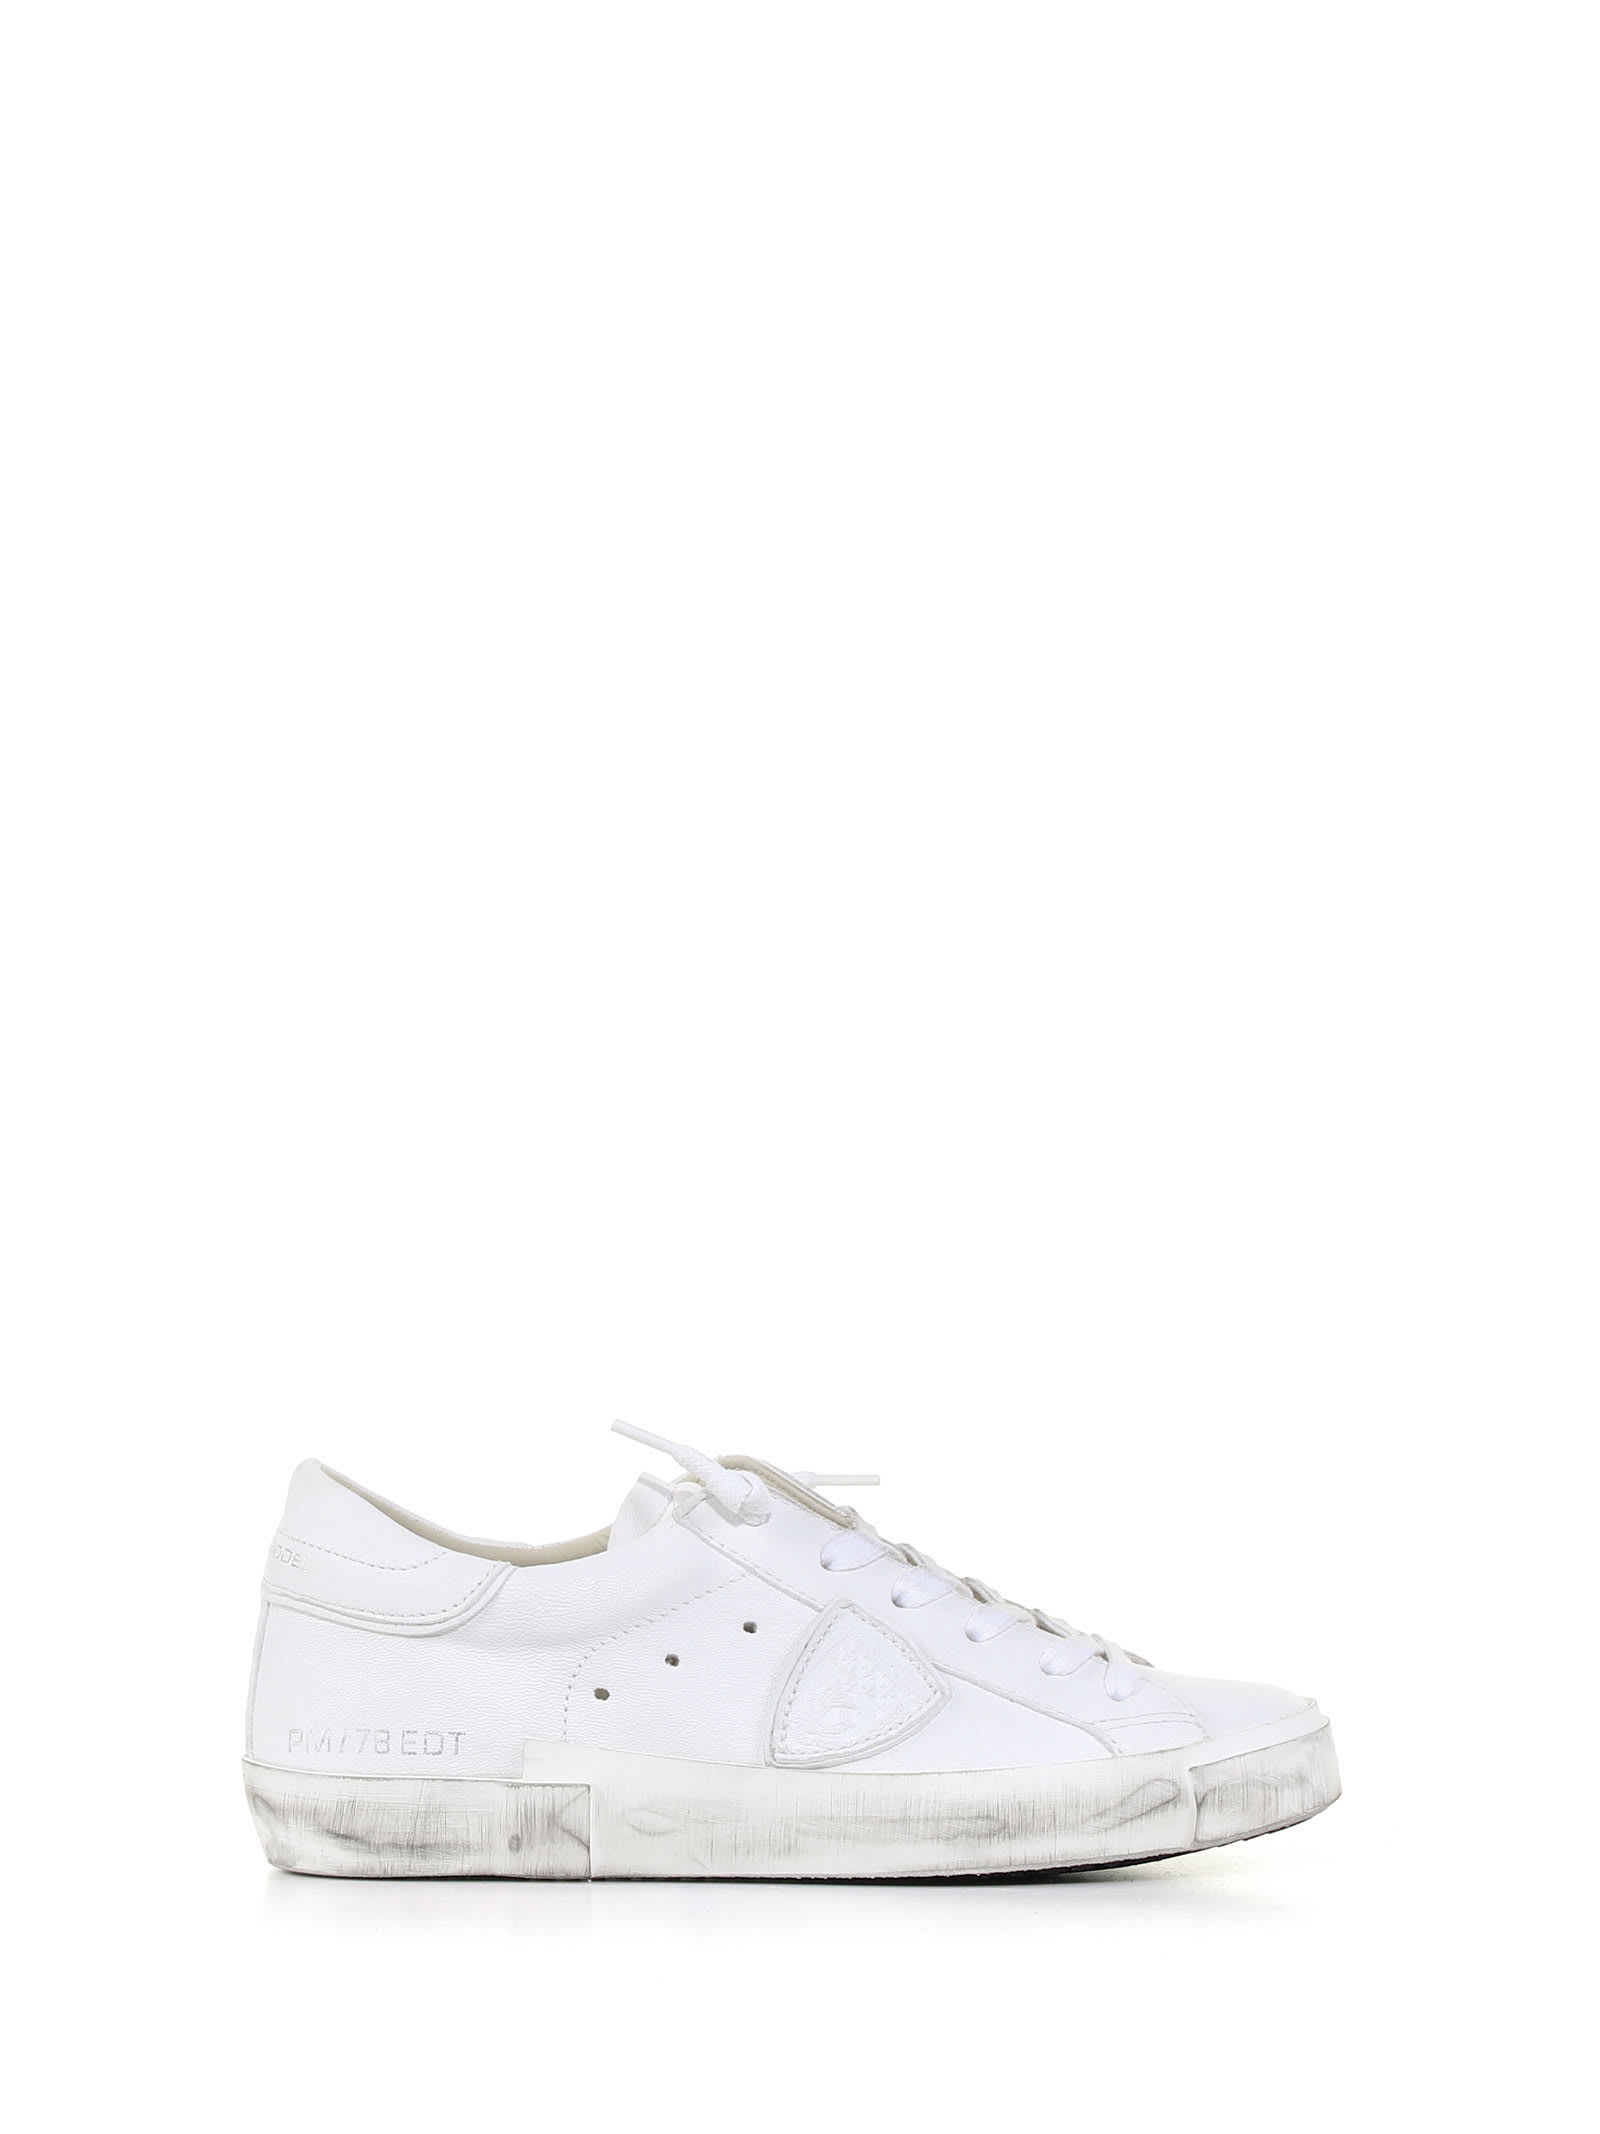 Philippe Model Paris Sneaker In Leather With Vintage Effect Details